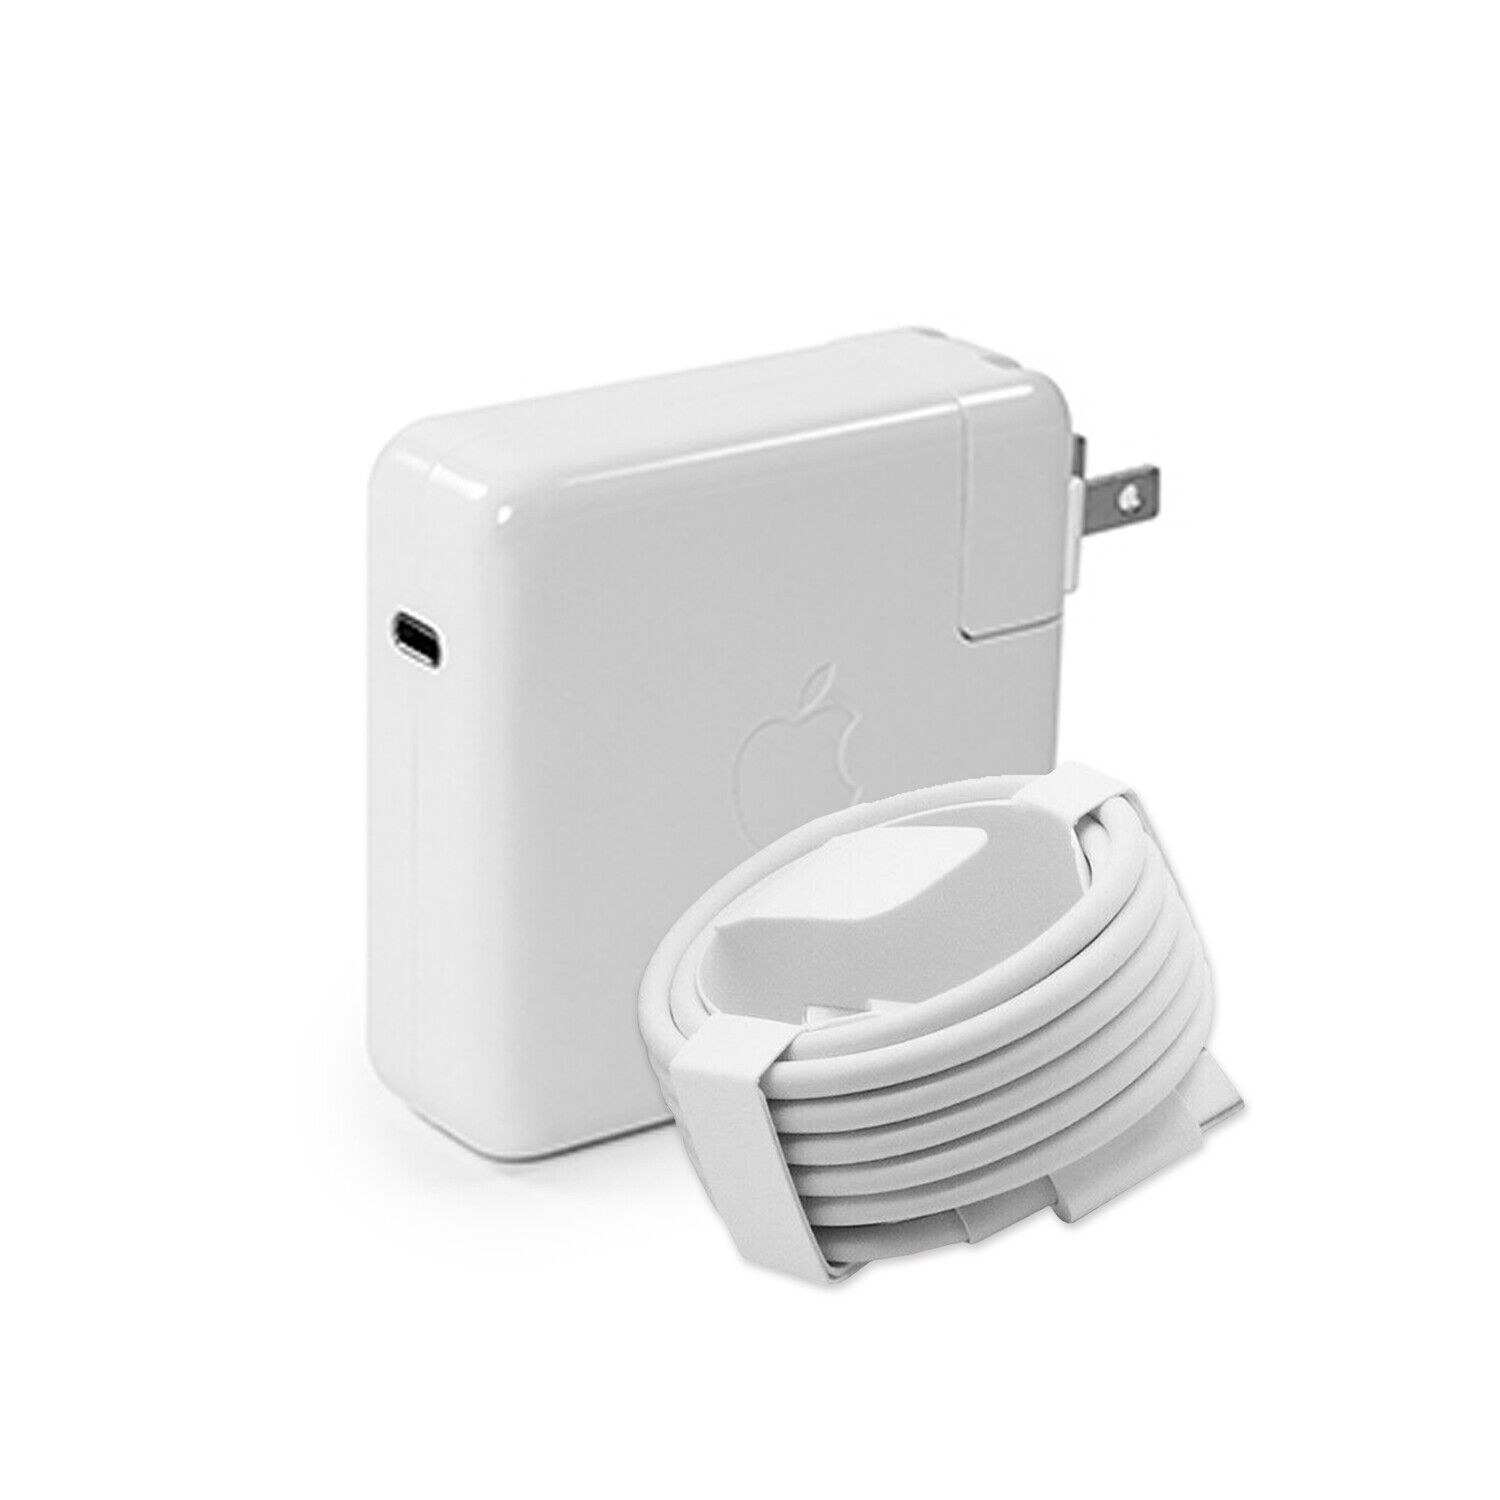 New Genuine OEM APPLE MacBook Pro 61W USB-C Power Adapter Charger